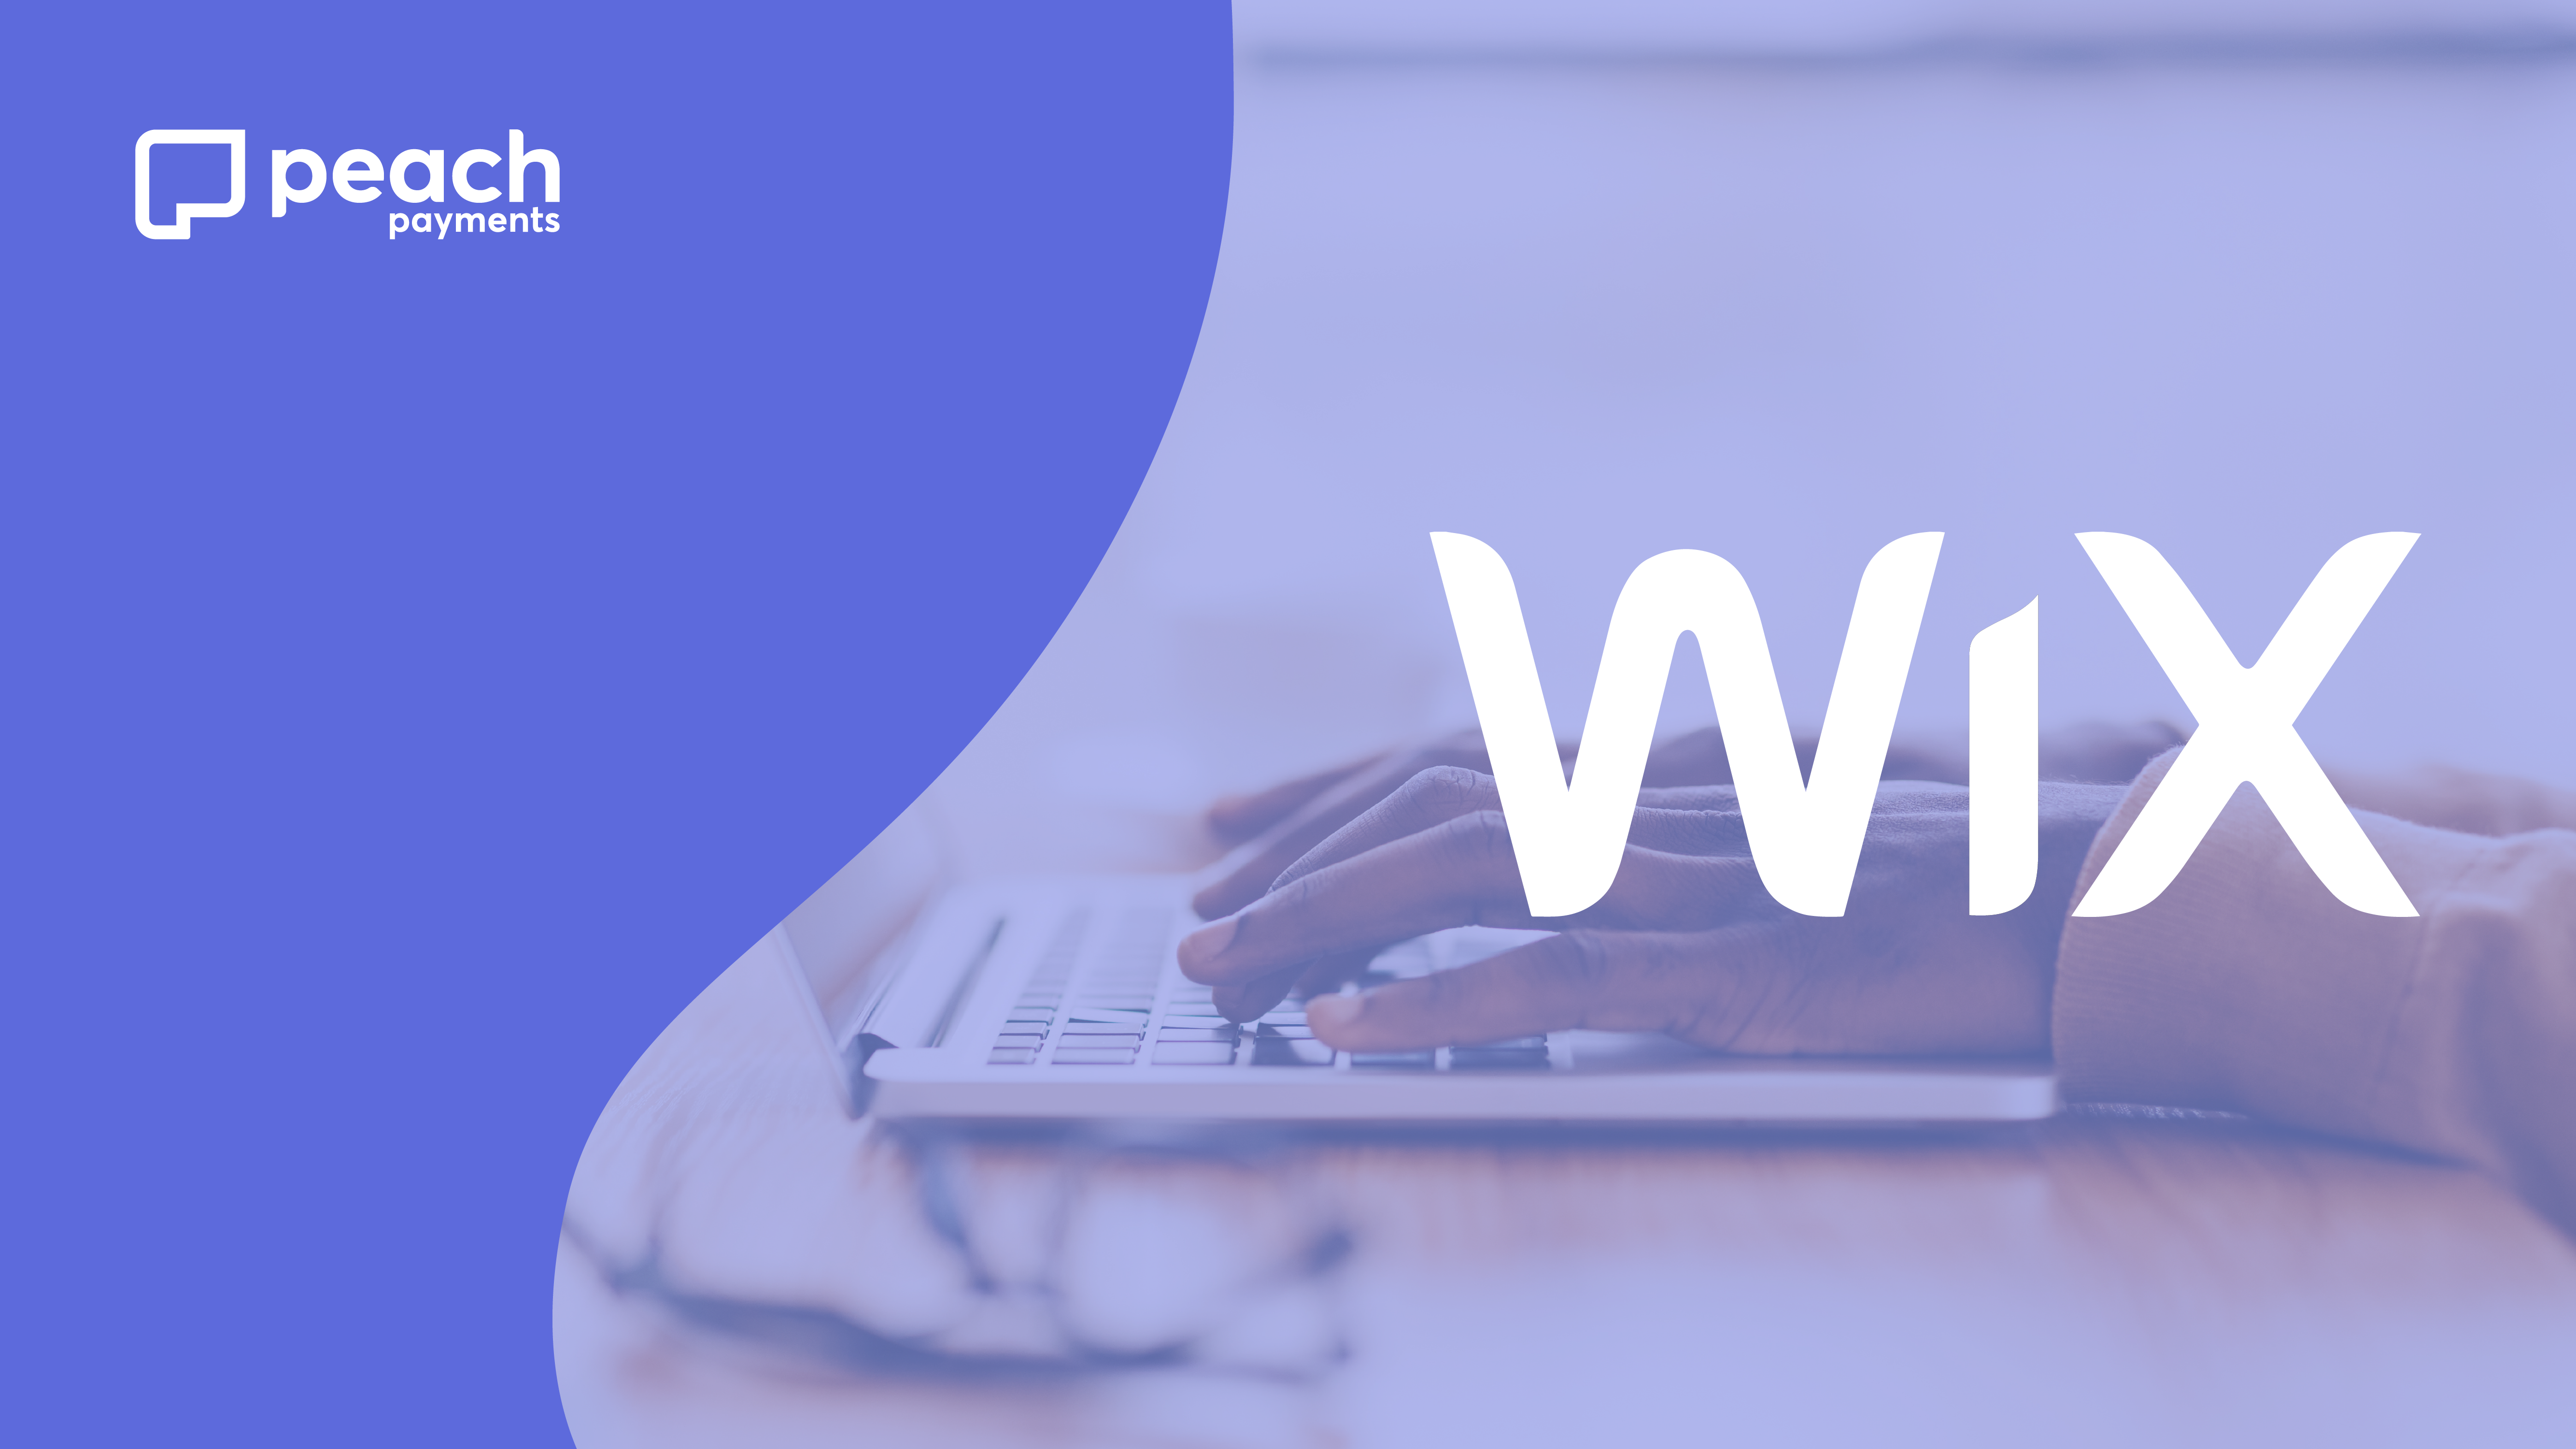 Thinking of starting a Wix store? Let’s get you paid.